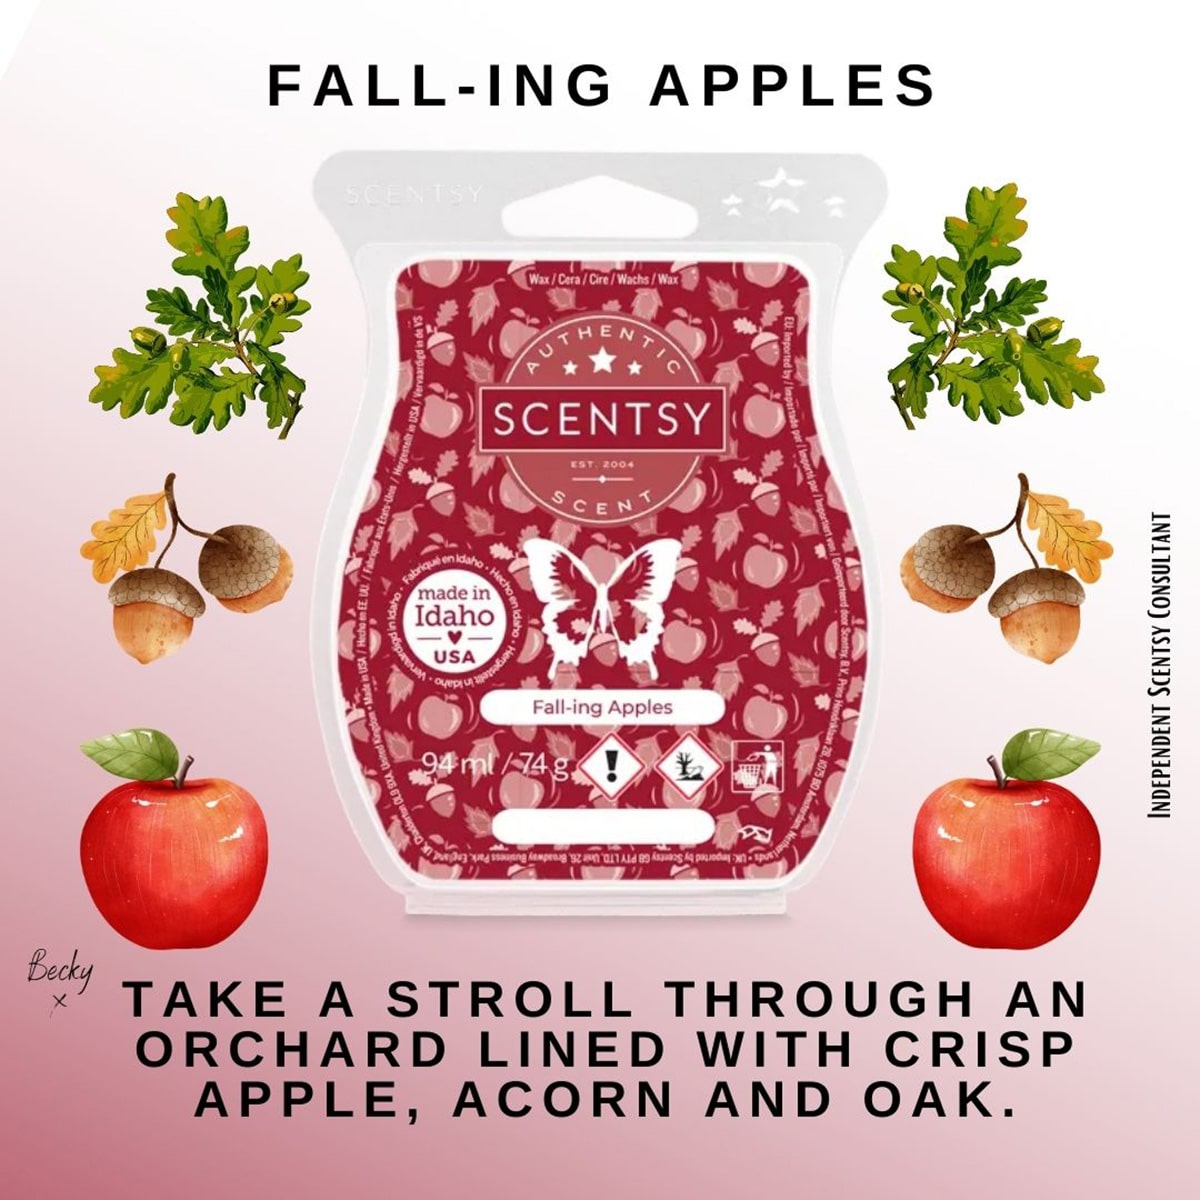 Orchard by the Sea Scentsy Brick - The Candle Boutique - Scentsy UK  Consultant